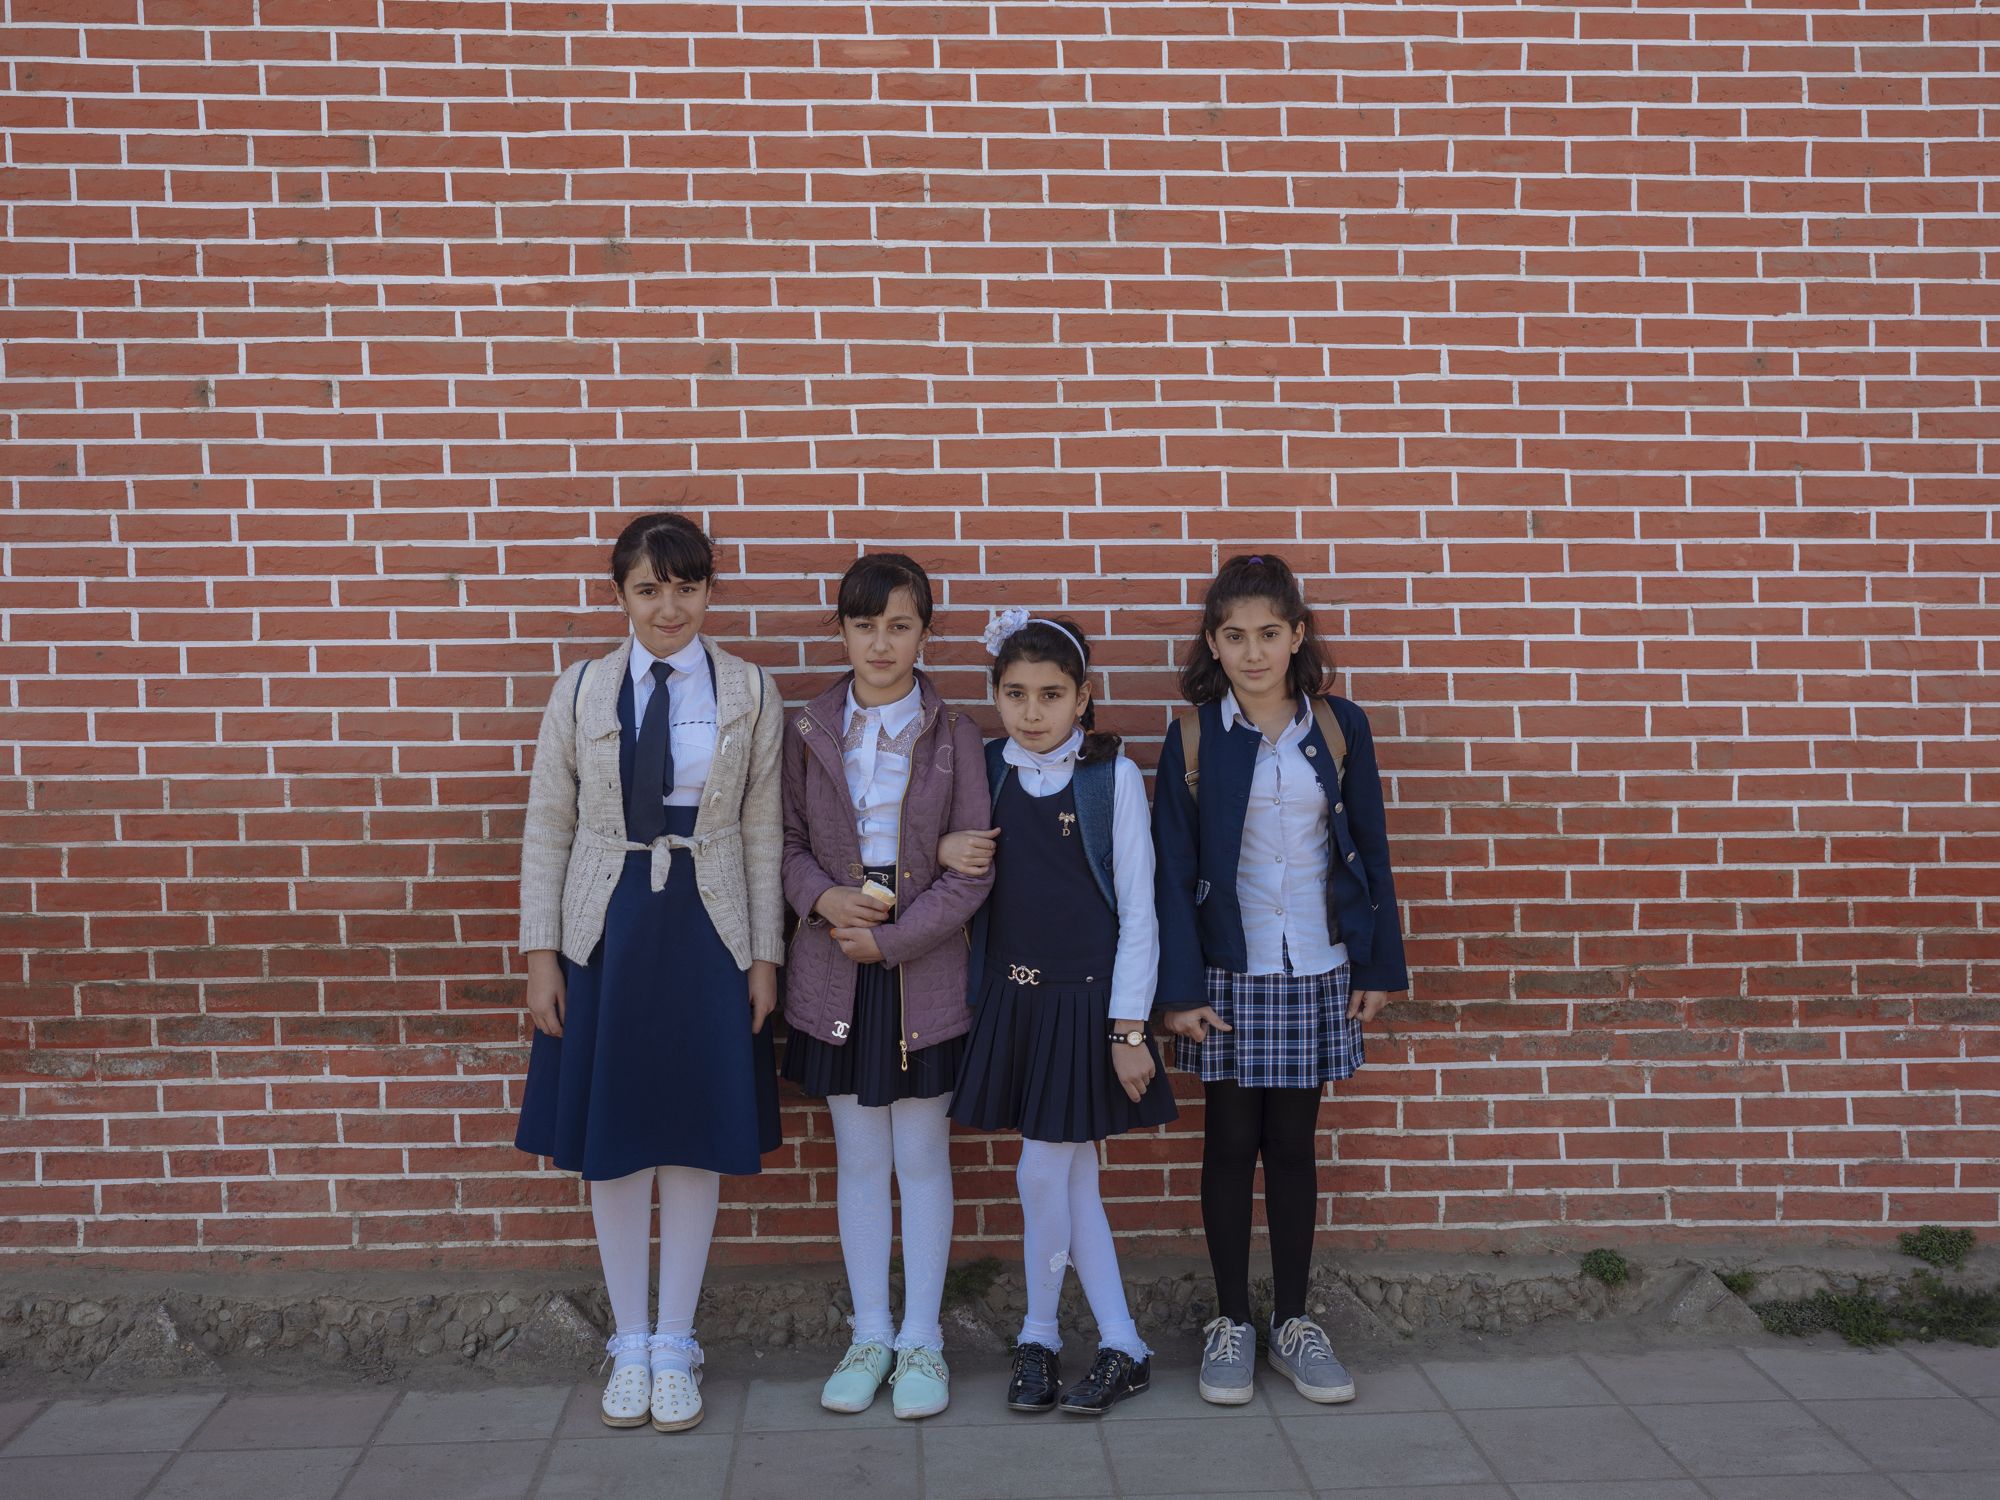 Girls pose after school in Kakalos village. Kakalos is a modern village, where girls are able to go to school. But outside of this town, in more isolated villages, the Soviet-era education system is obsolete and ill-equipped to prepare youth for the society of today. Azerbaijan still suffers from too many traditions that often undermine education, especially that of young girls. Some girls are so depressed with the education they receive that they give up on it, and prefer getting married. Image by Emin Ozmen / Magnum Photos. Azerbaijan, 2018.